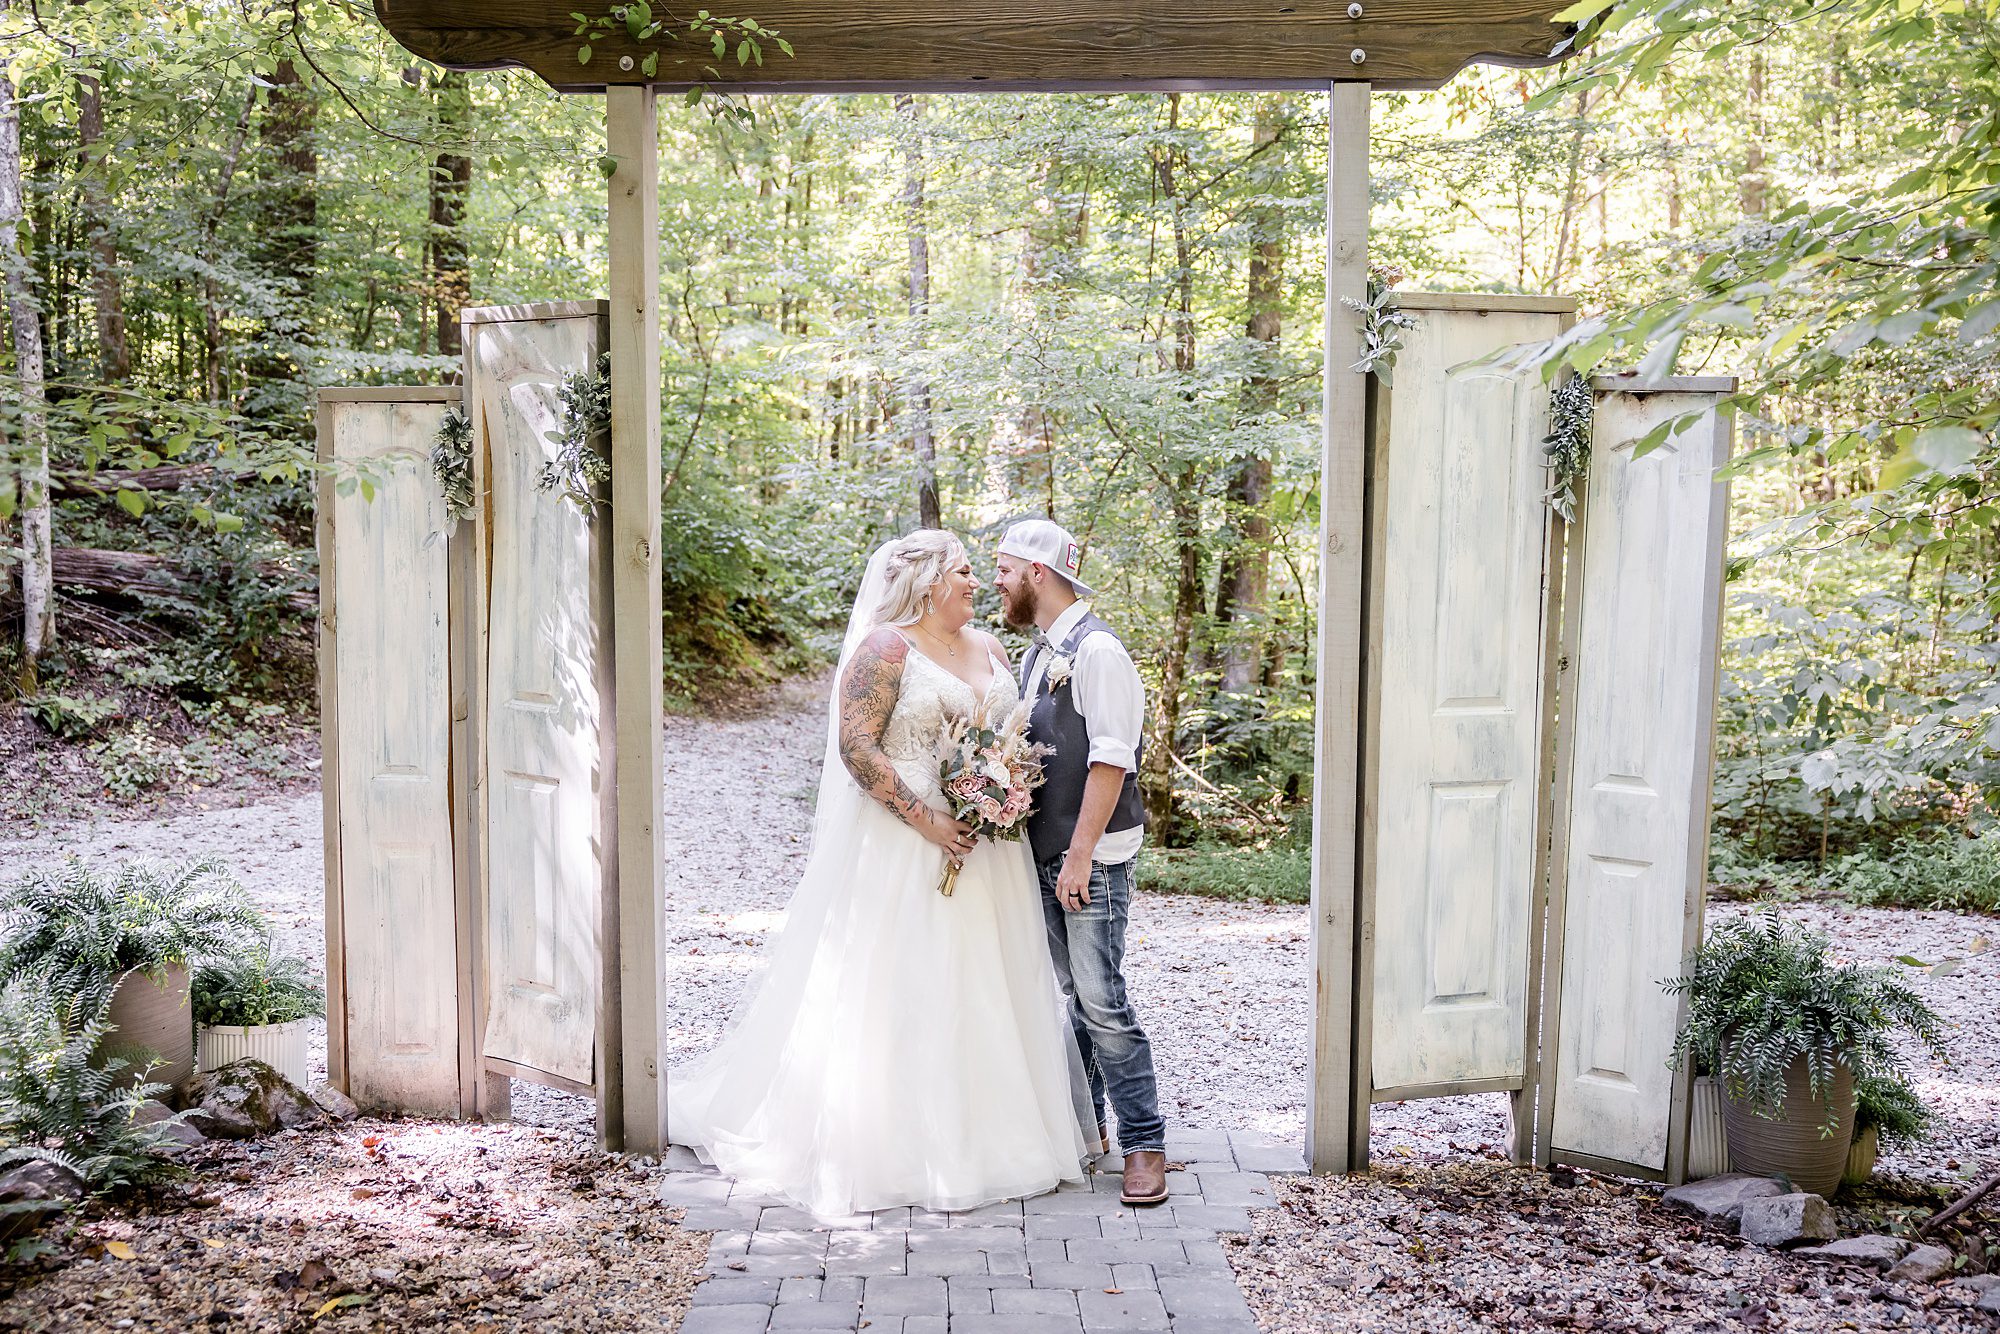 Summer Country Micro Wedding - Bride and Groom Portrait